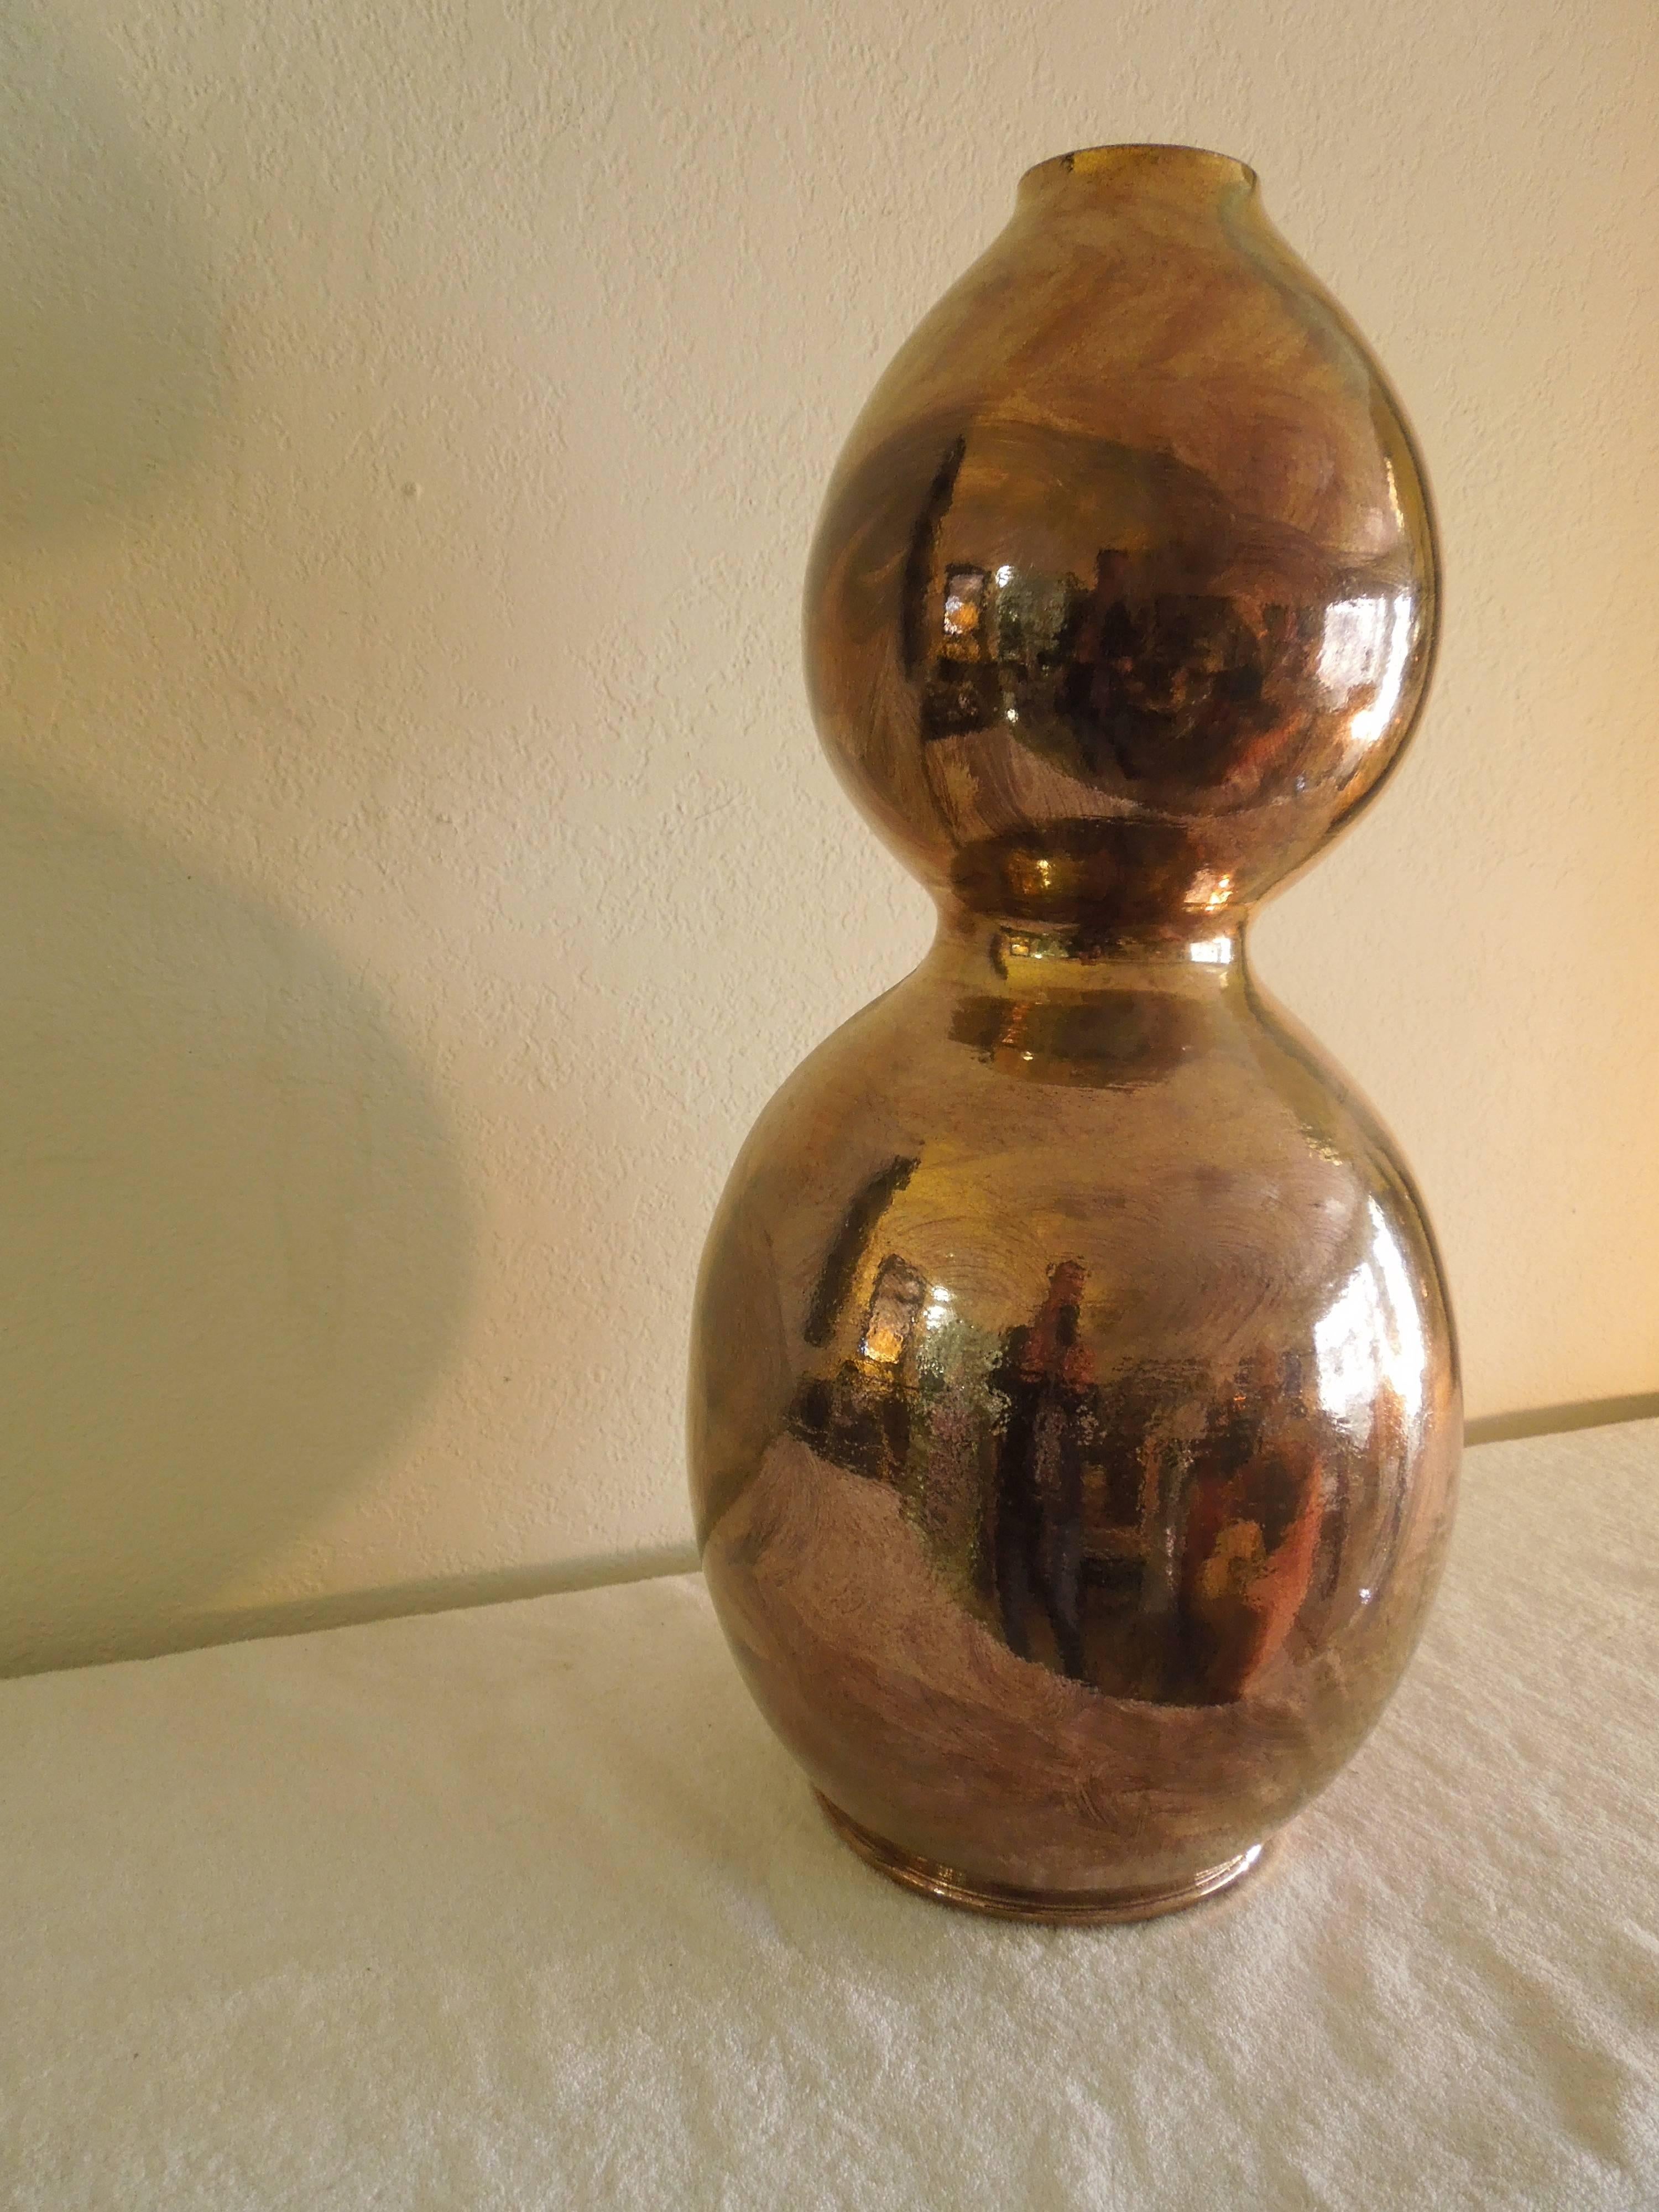 A large metallic bronze color glaze vase by artist Guy Mc Cloy. Mr. Mc Cloy did custom ordered pottery for Palm Springs designer Steve Chase. This piece was in the living room of a Palm Springs estate entirely designed by Mr. Chase in the early